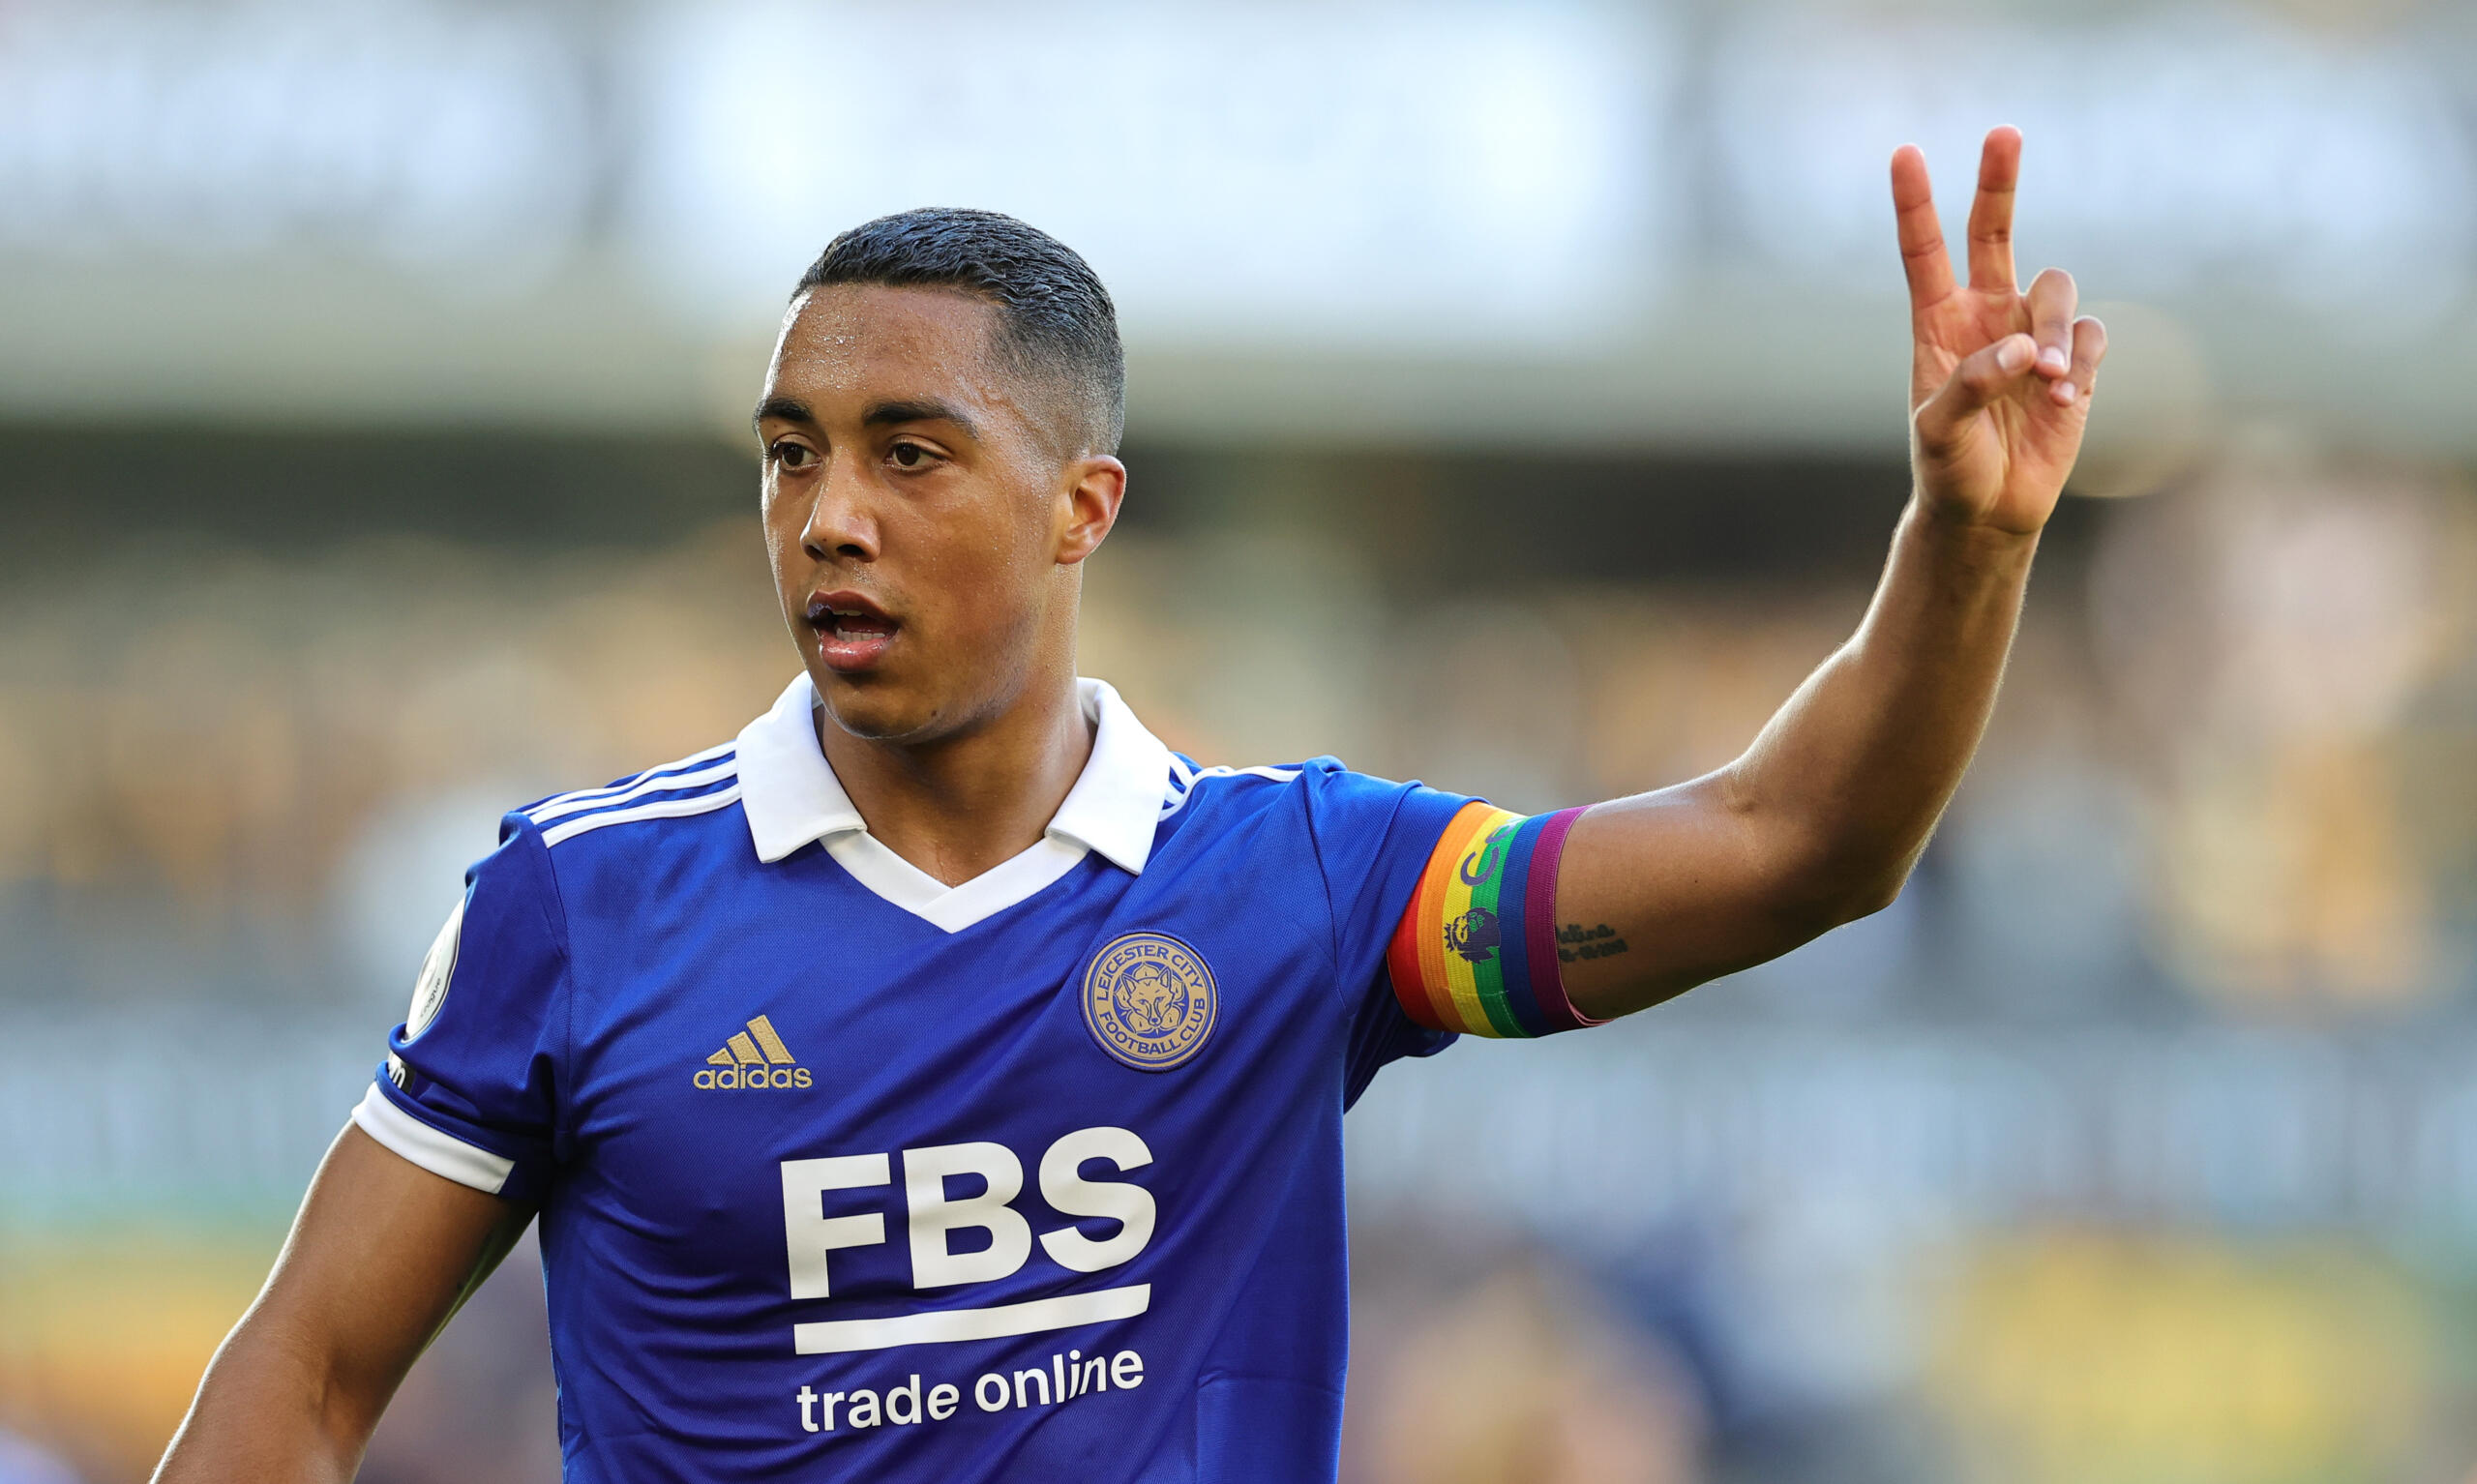 Roma keep scouring the market to find bargains and have started eyeing Youri Tielemans. His contract with Leicester City runs out in June.